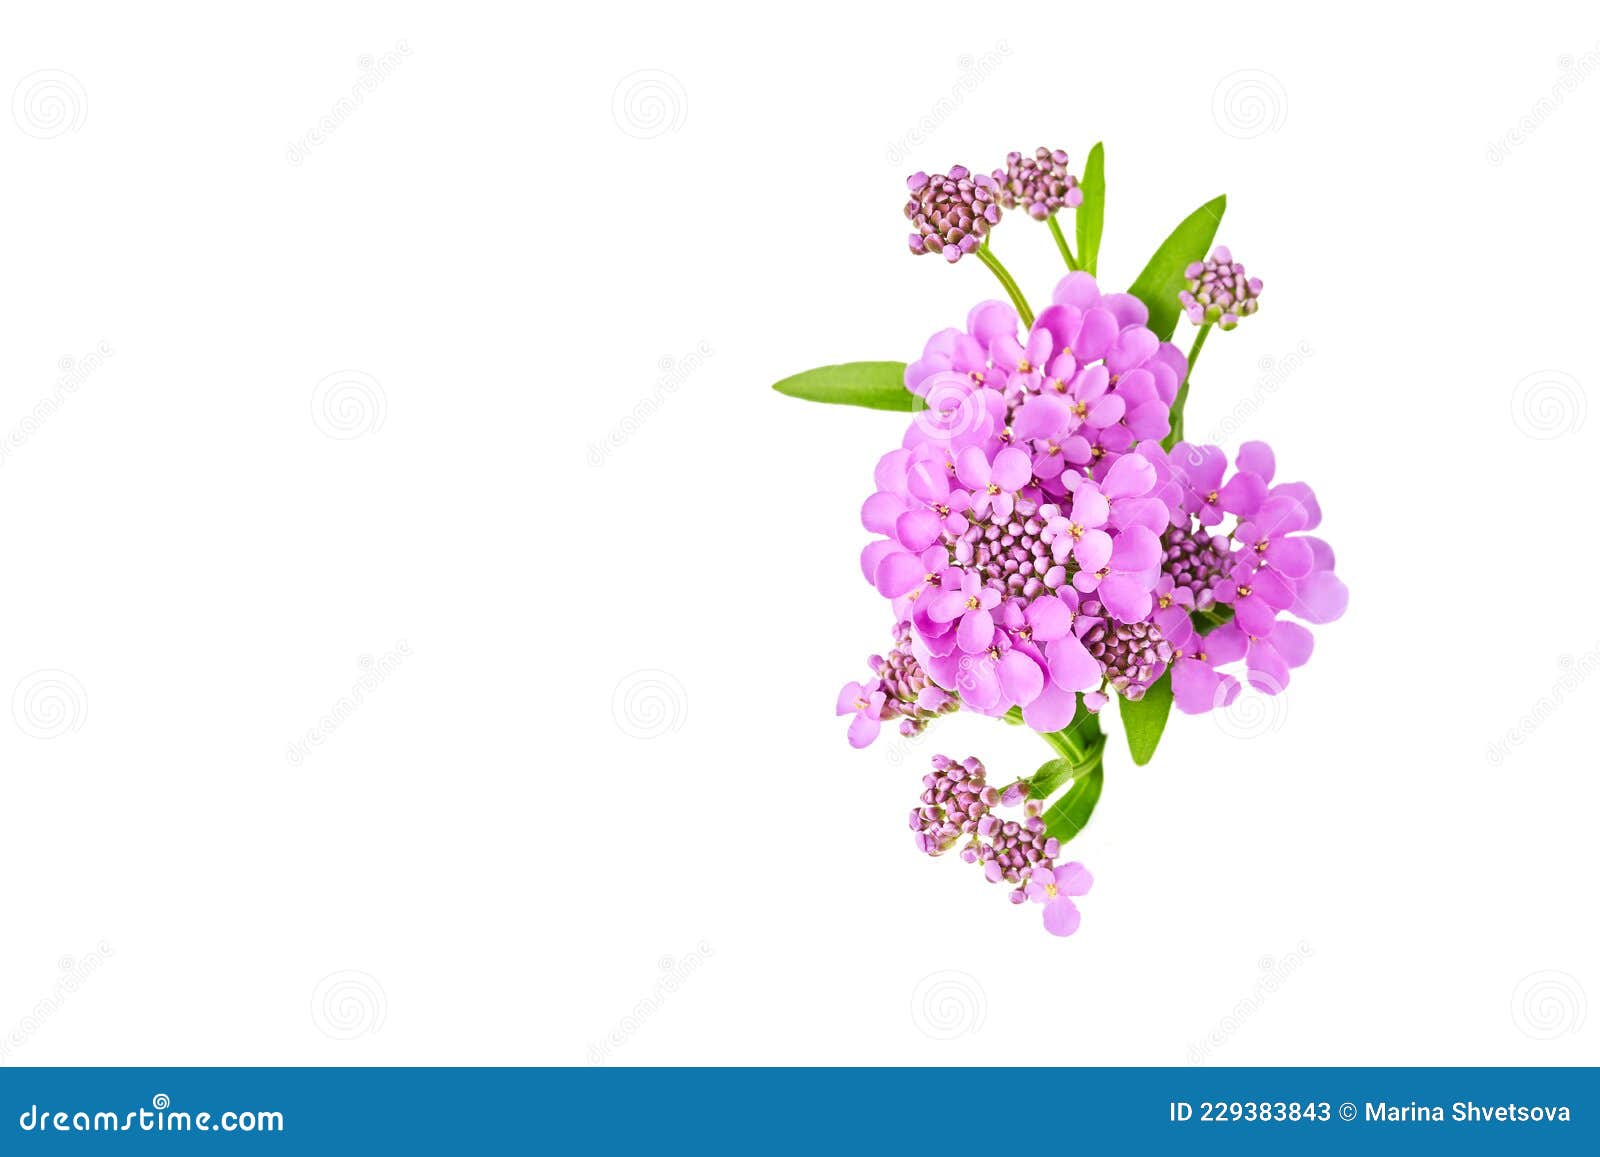 layout of greeting card, banner for birthday, wedding. beautiful purple flowers of iberia close-up macro on a white background